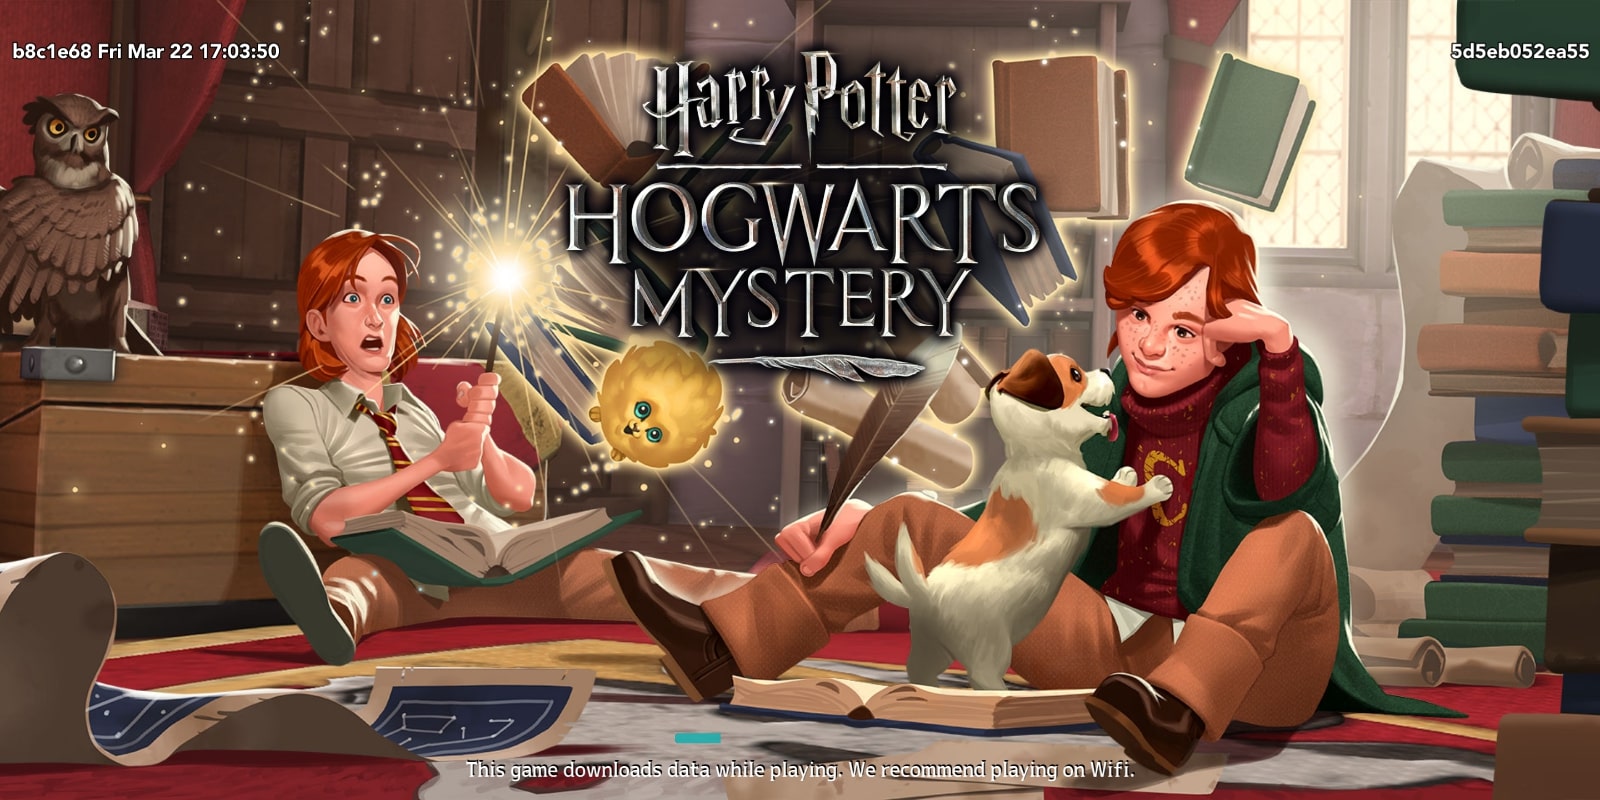 Hogwarts Legacy Guide: Tips and Tricks for Magic Students